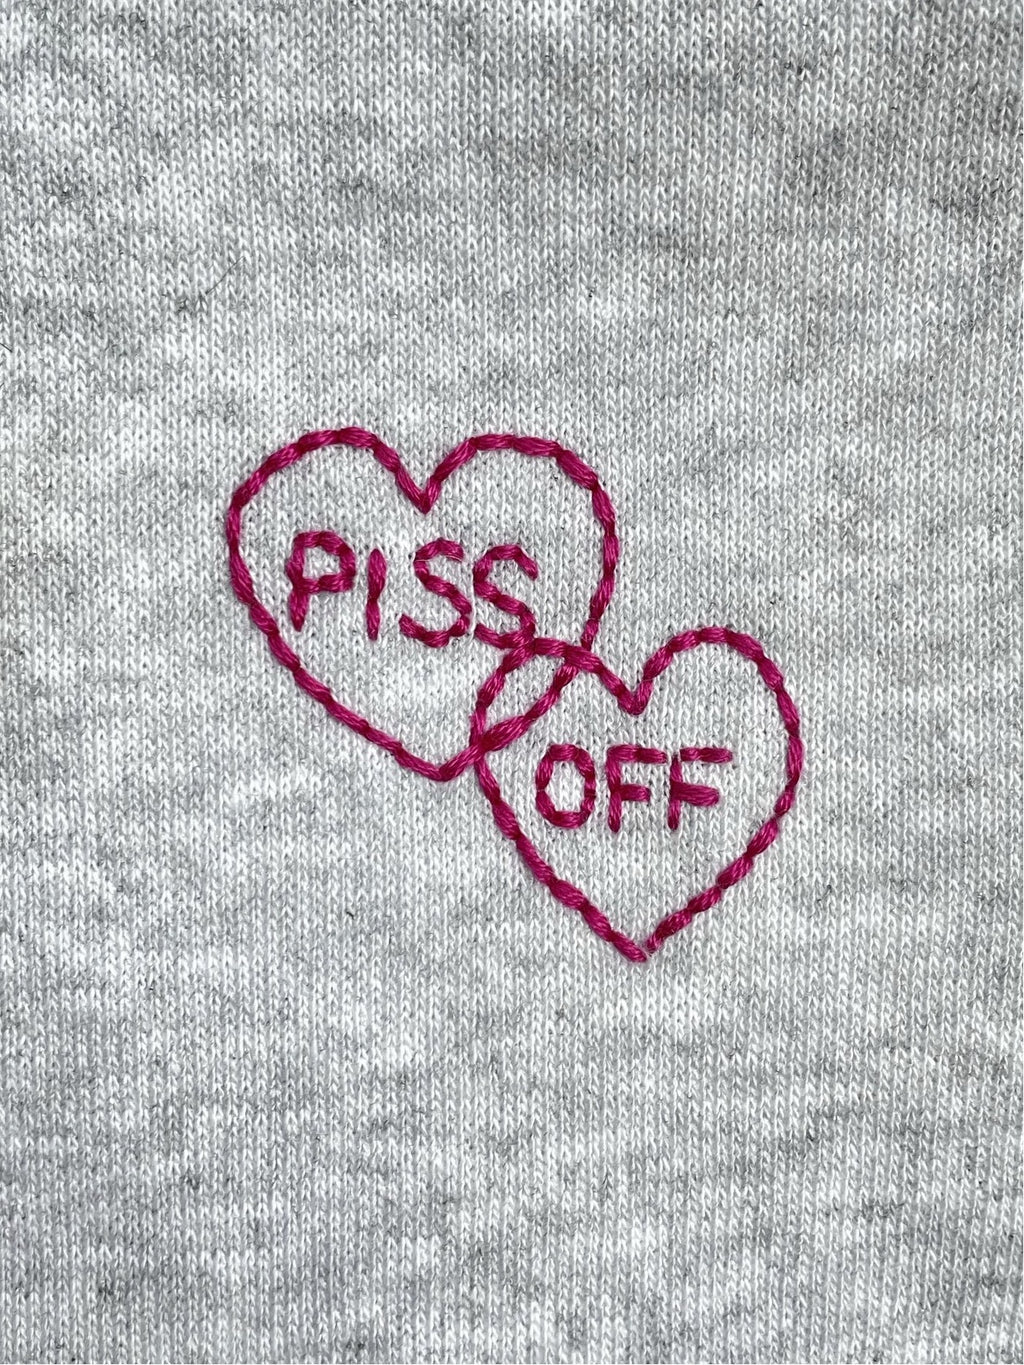 <3 PISS OFF <3 - SWEATER